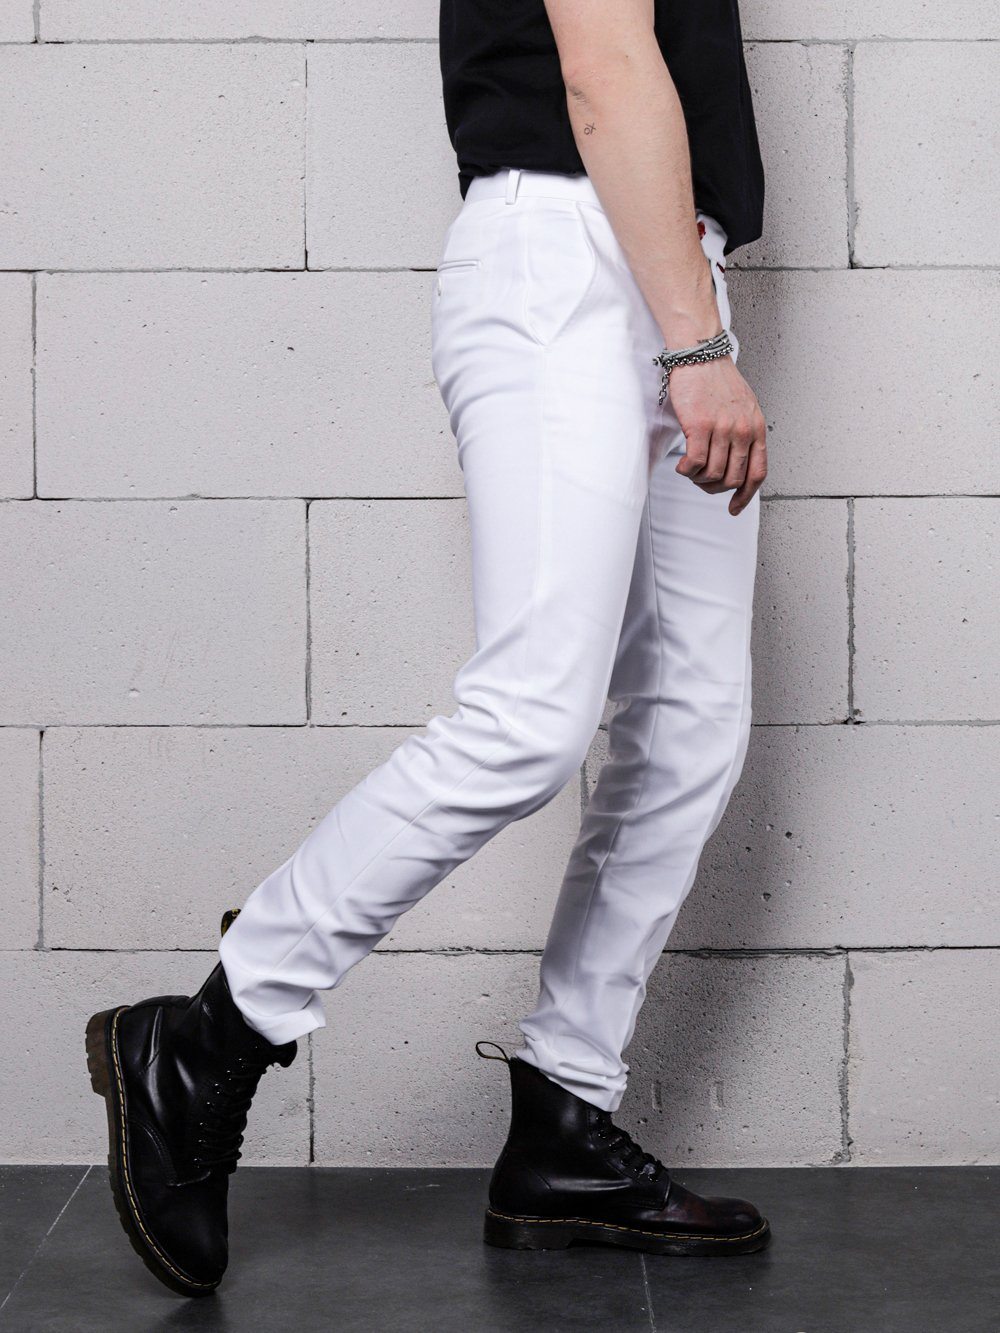 A man wearing CREAM FRAPPUCCINO pants and black boots.